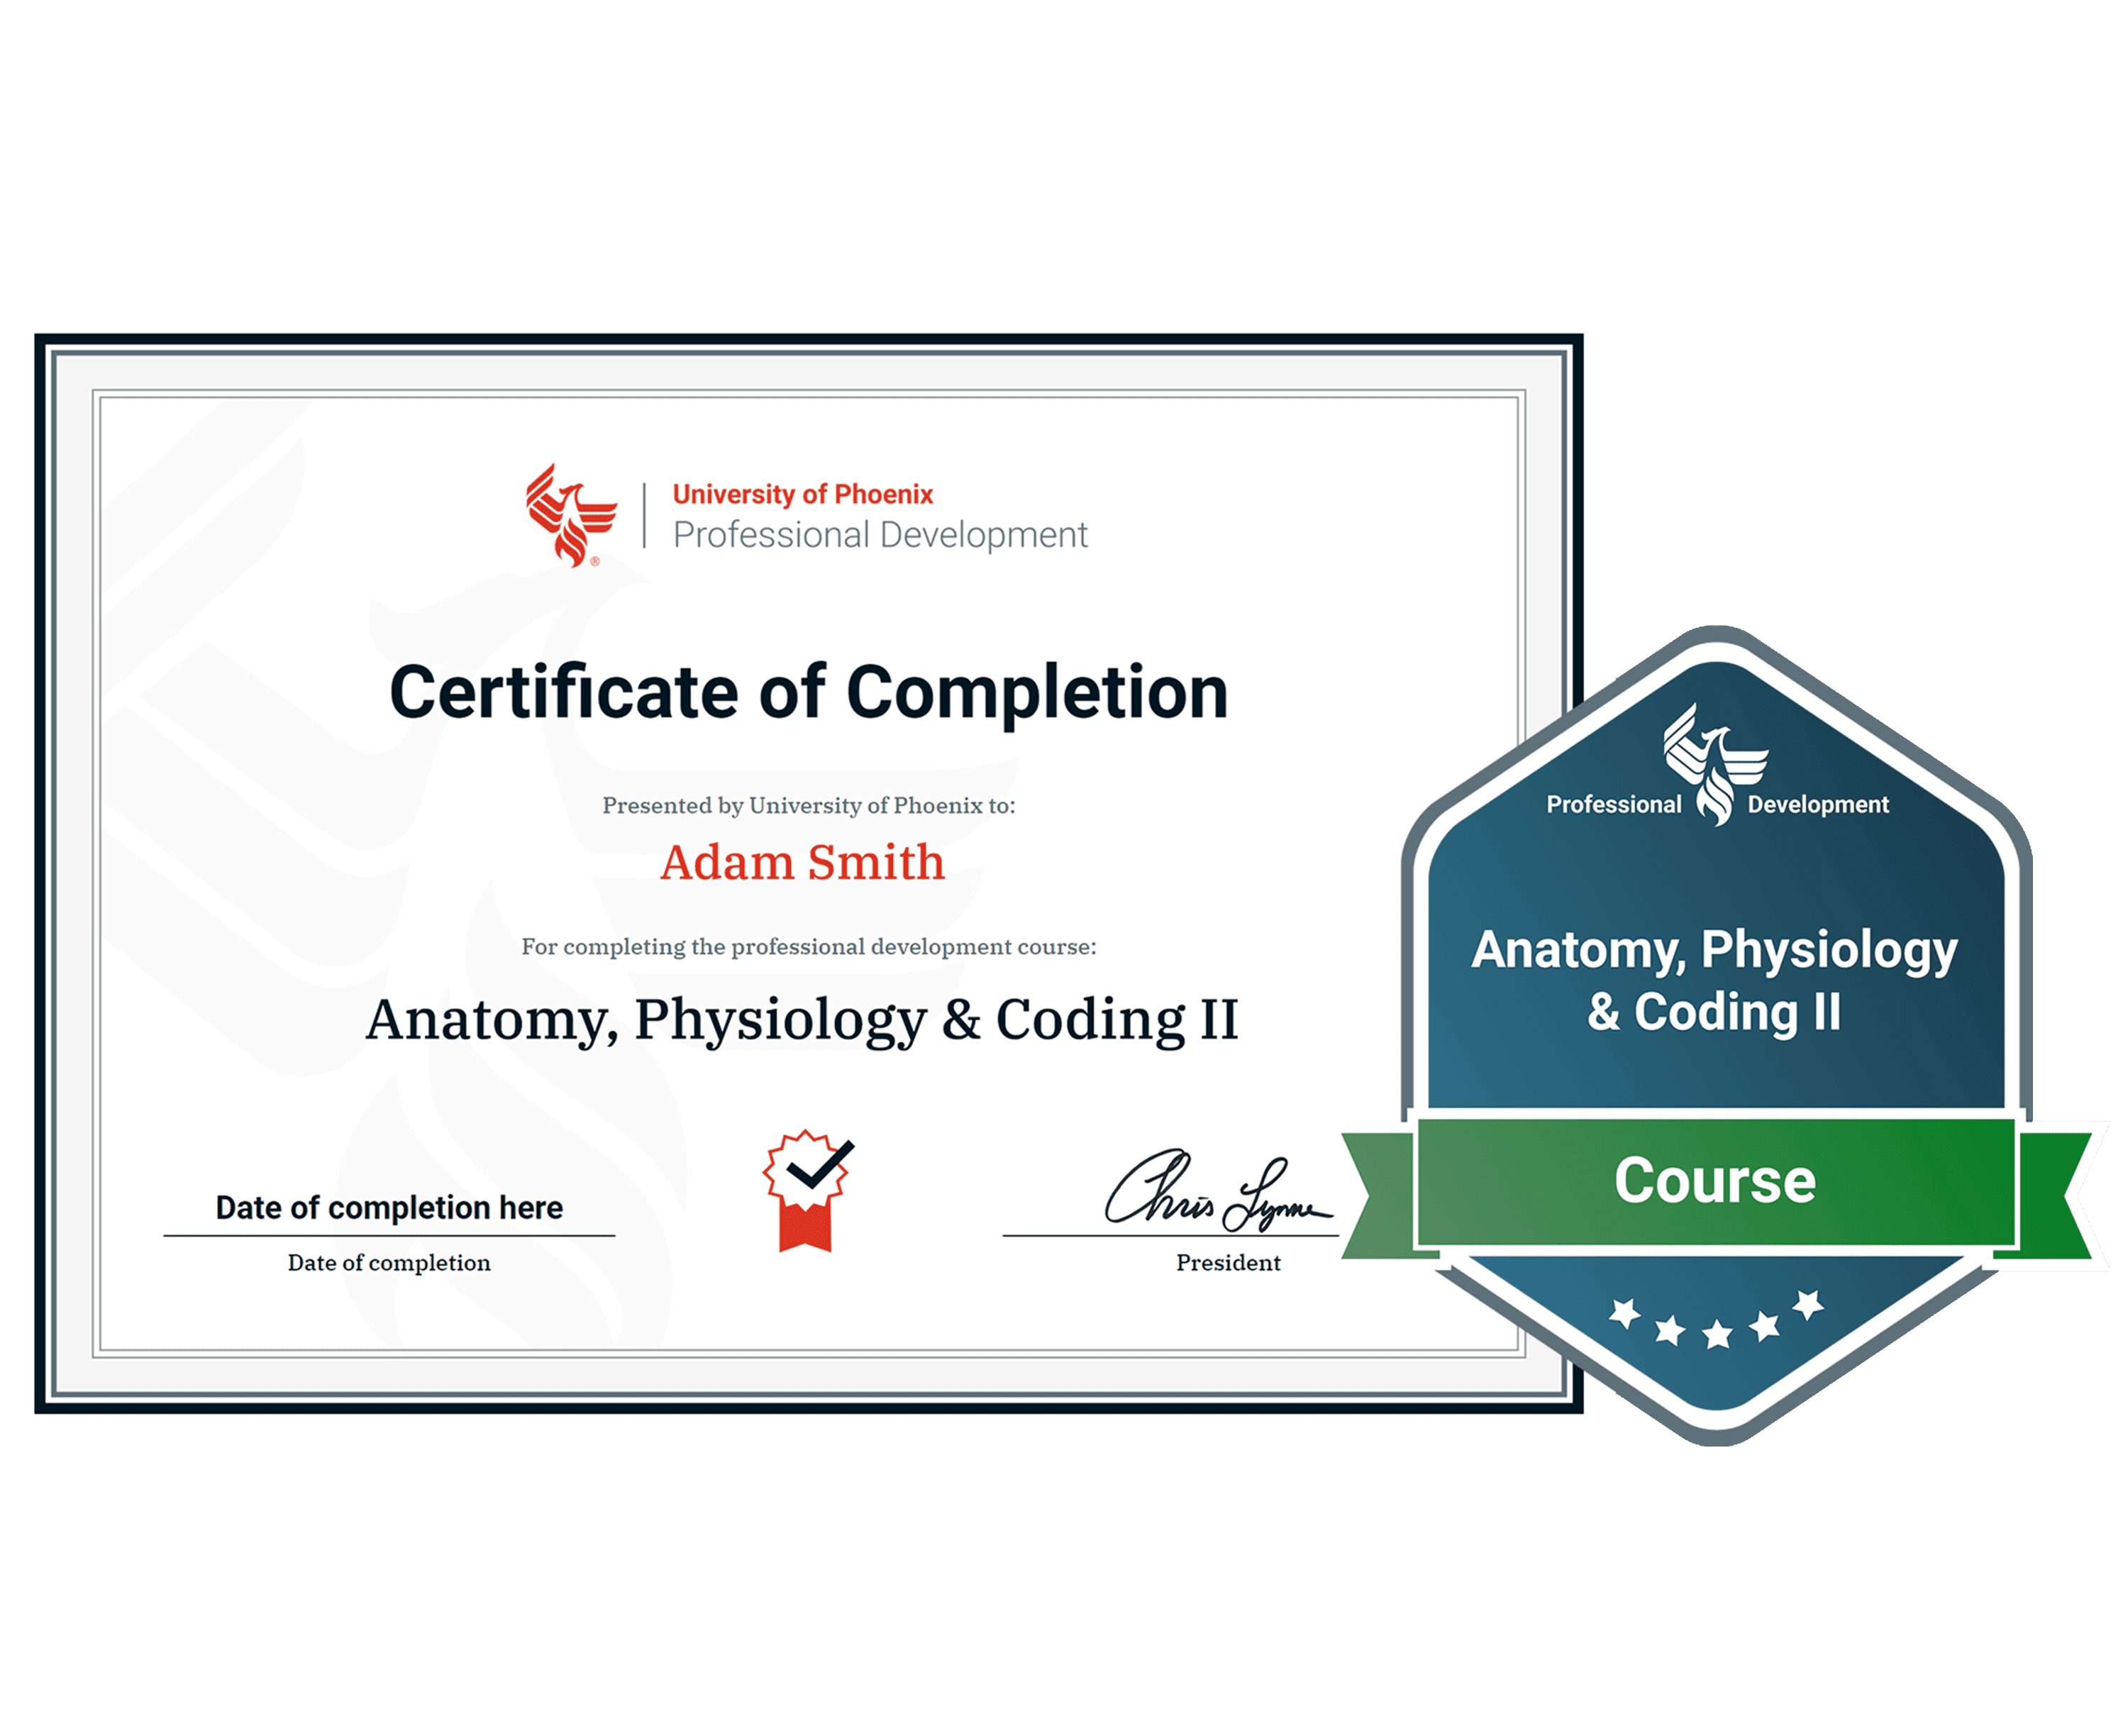 Sample certificate and badge for Anatomy, Physiology and Coding 2 course